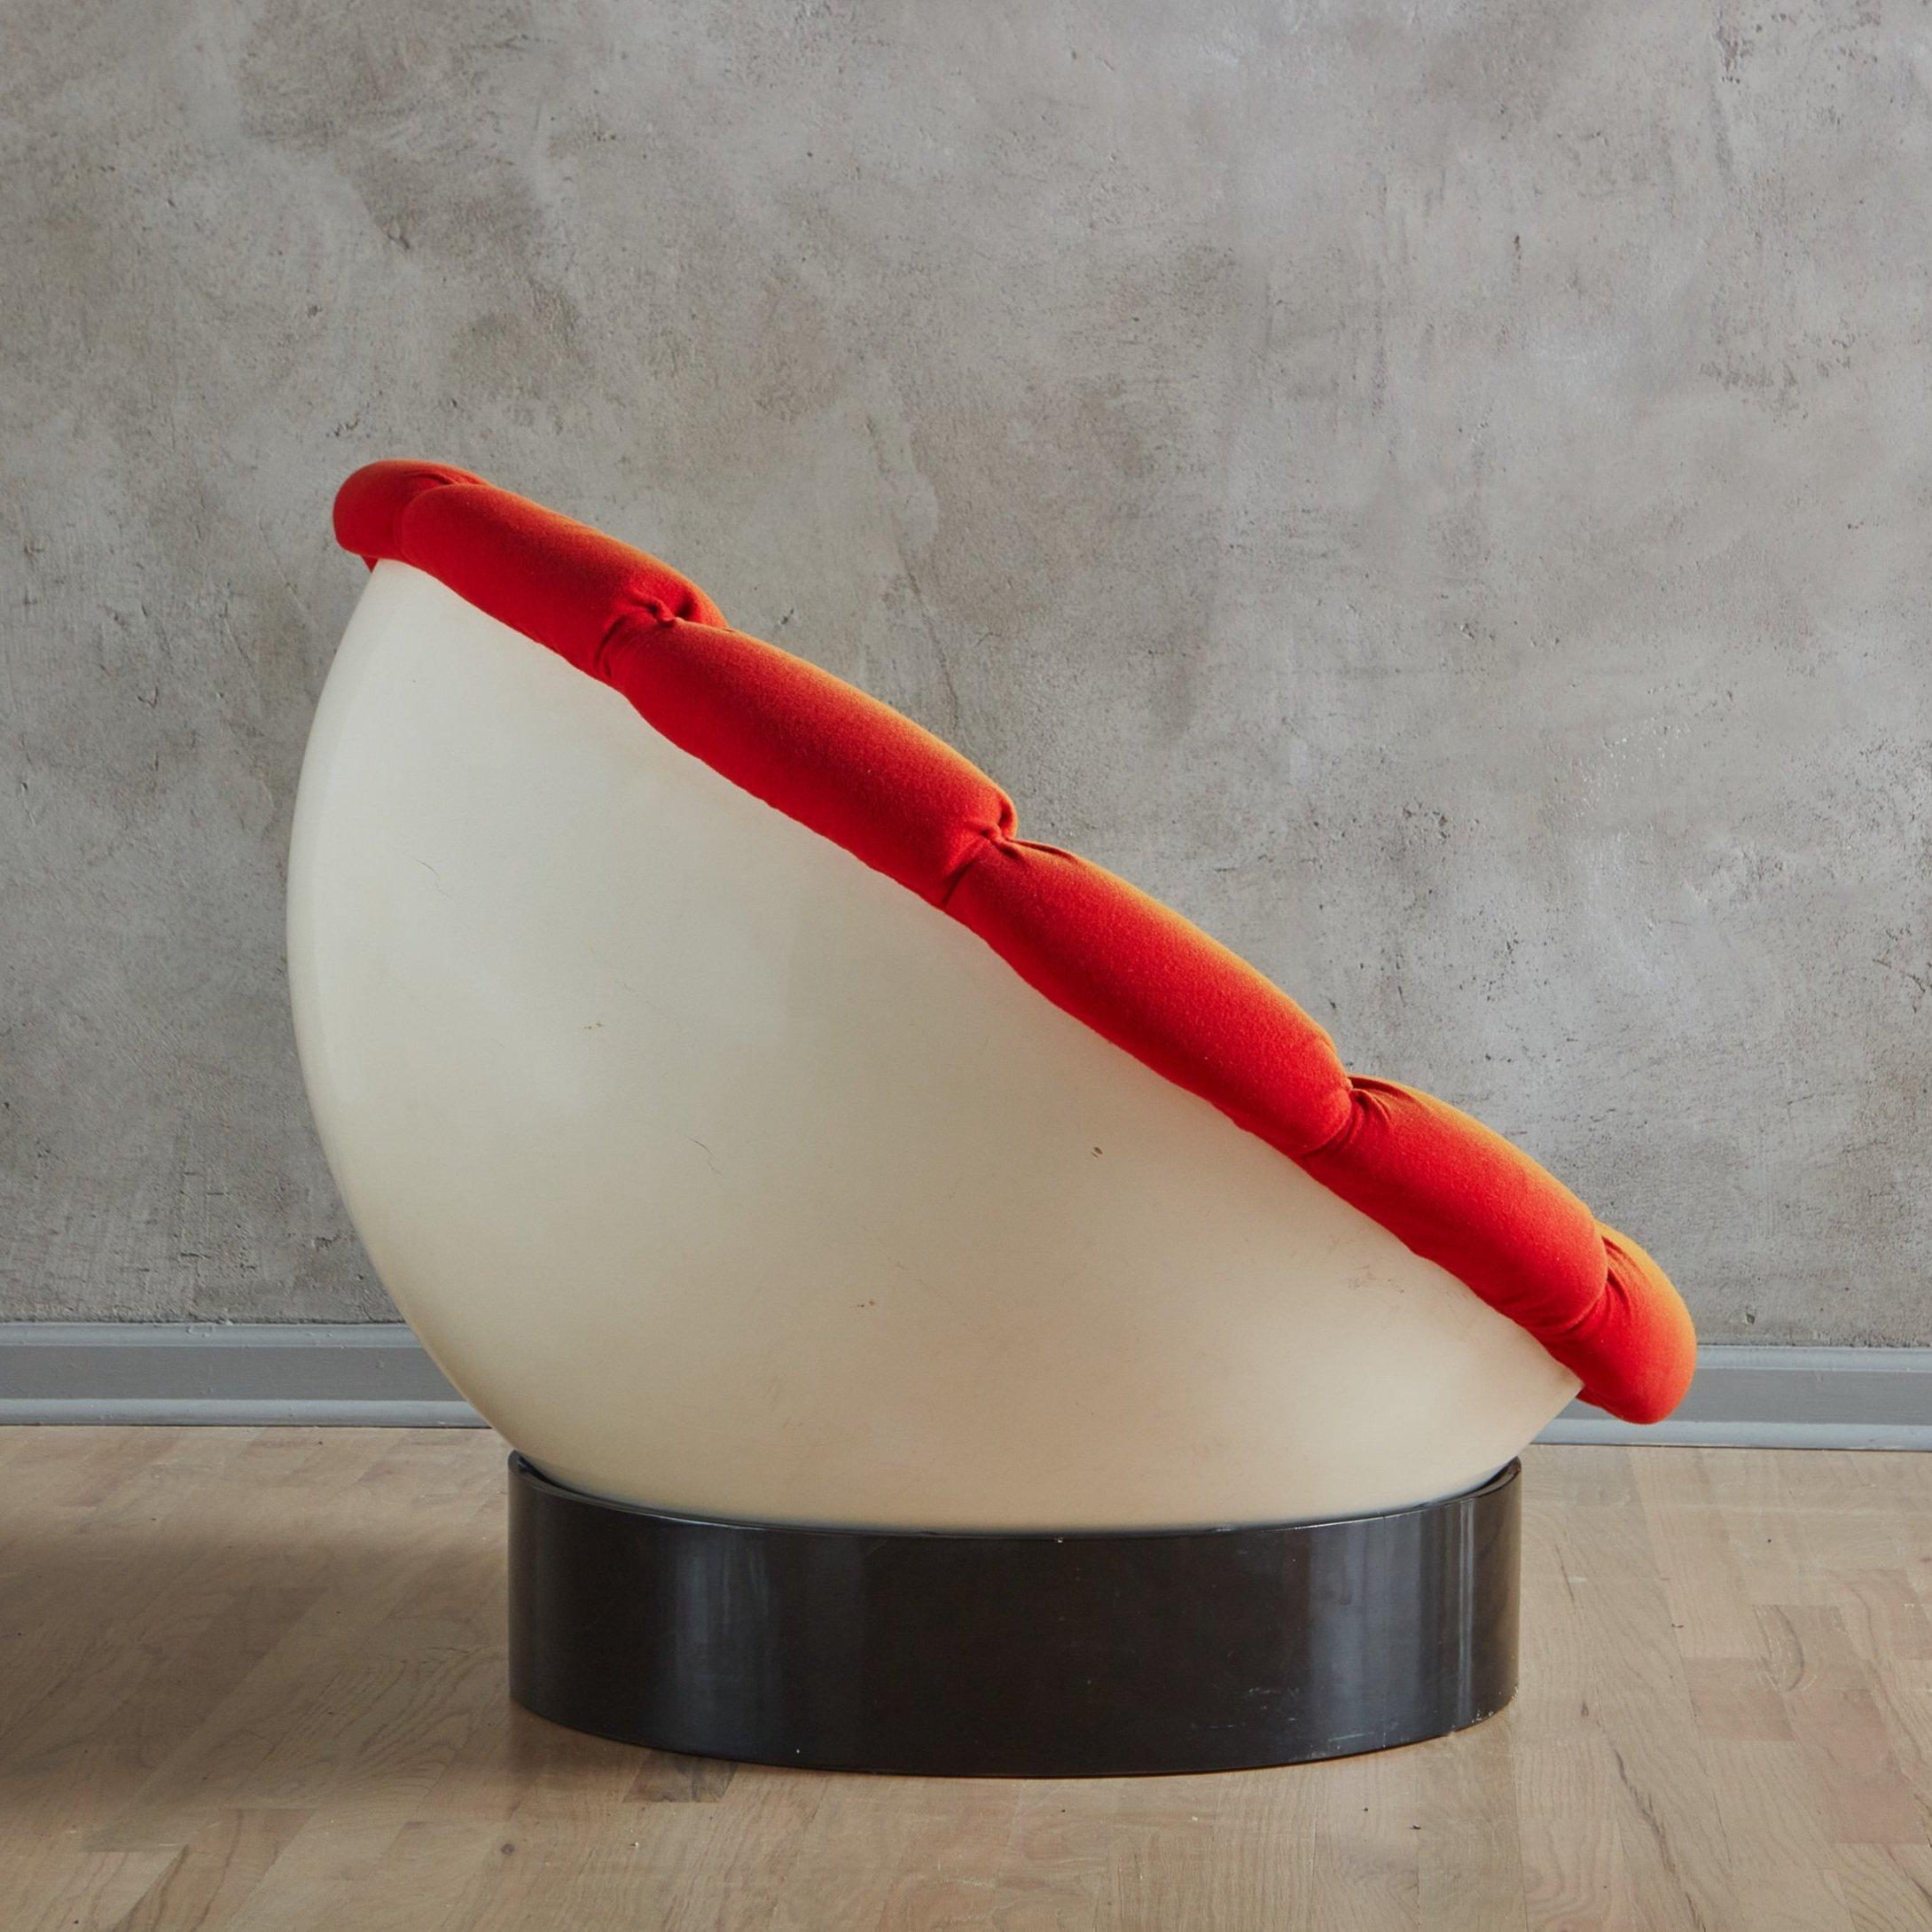 Italian Fiberglass ‘Girasole’ Chair with Pillow by Luciano Frigerio, Italy 1960s For Sale